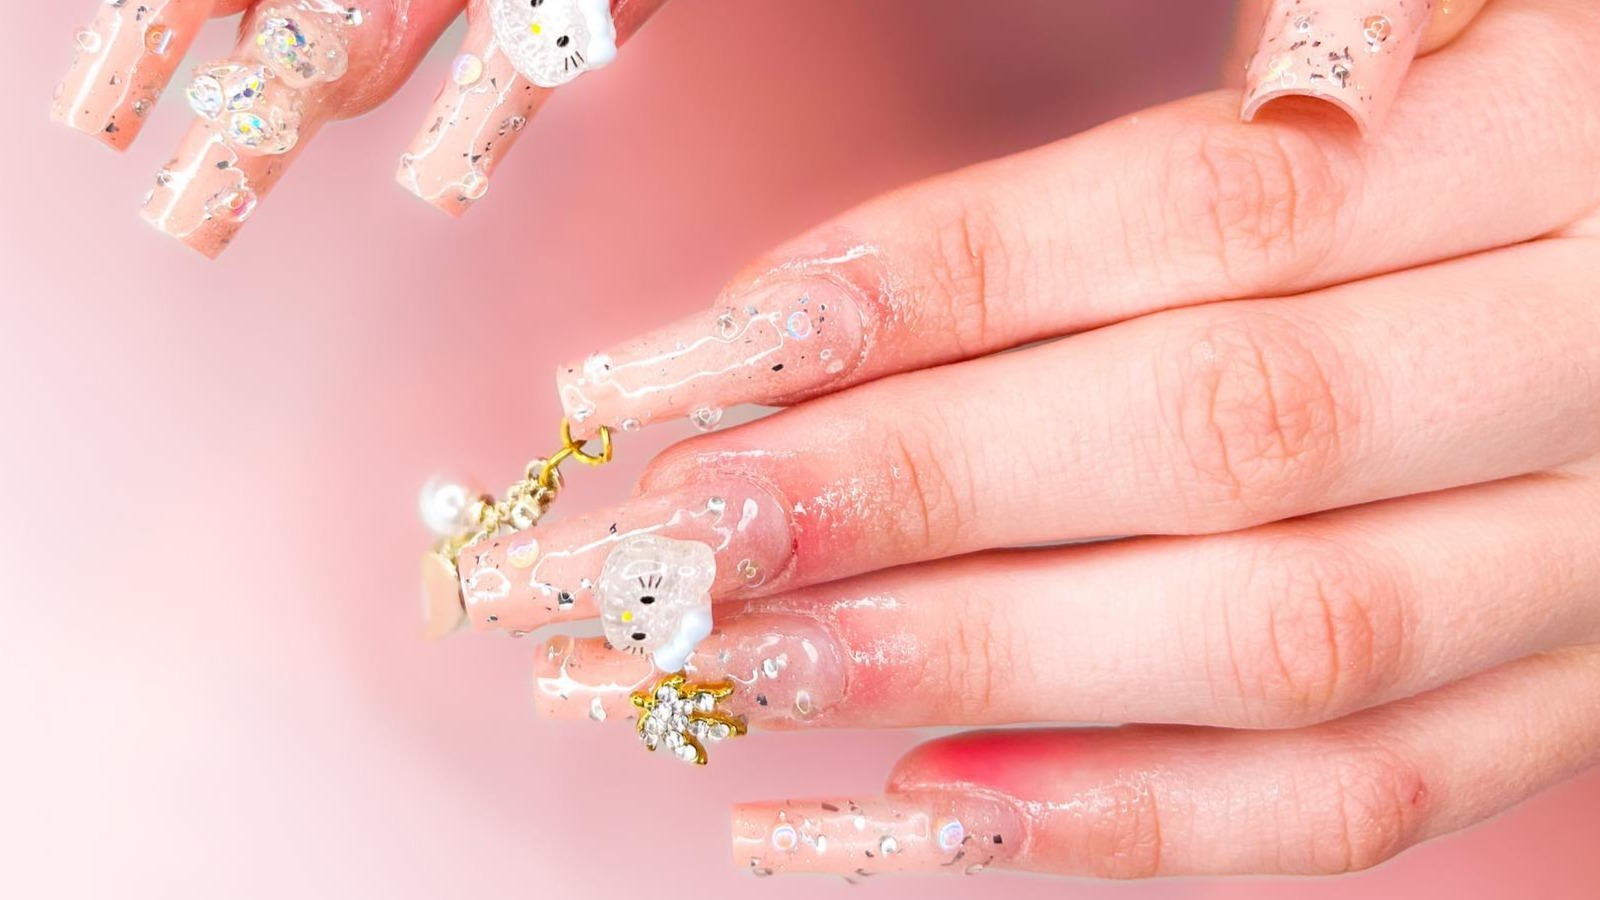 Pierced Nails Are The Latest '90s Trend To Make A Comeback